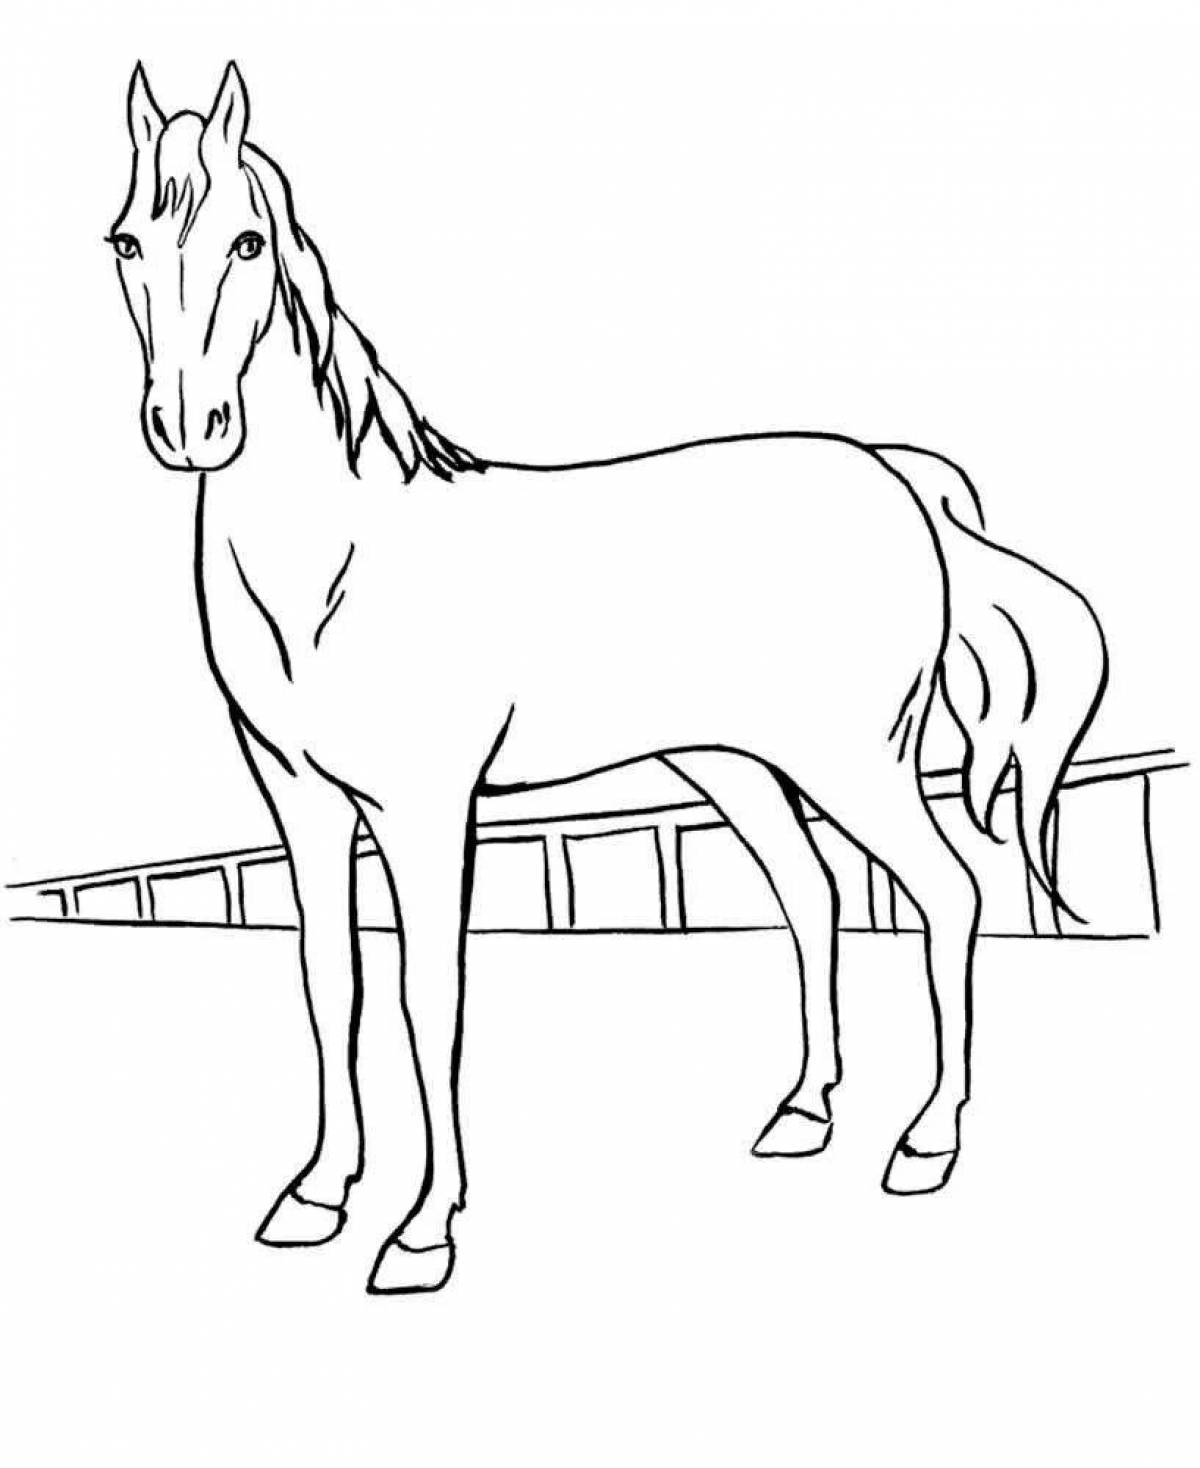 Horse drawing #9